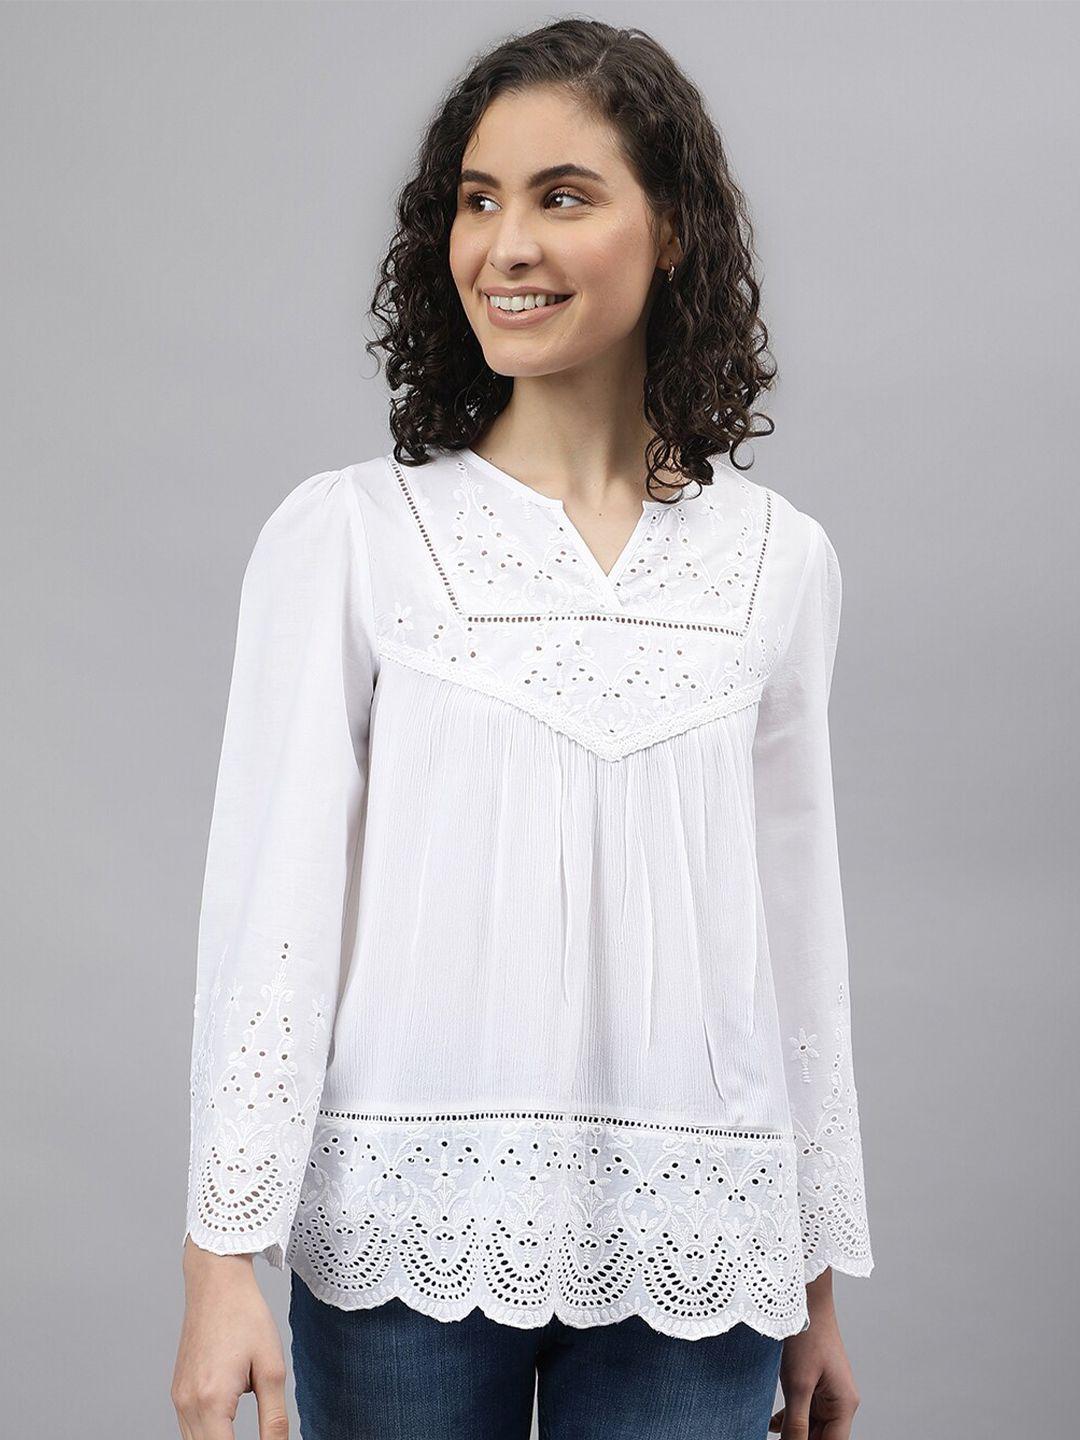 beverly hills polo club ethnic motif embroidered schiffli pure cotton top